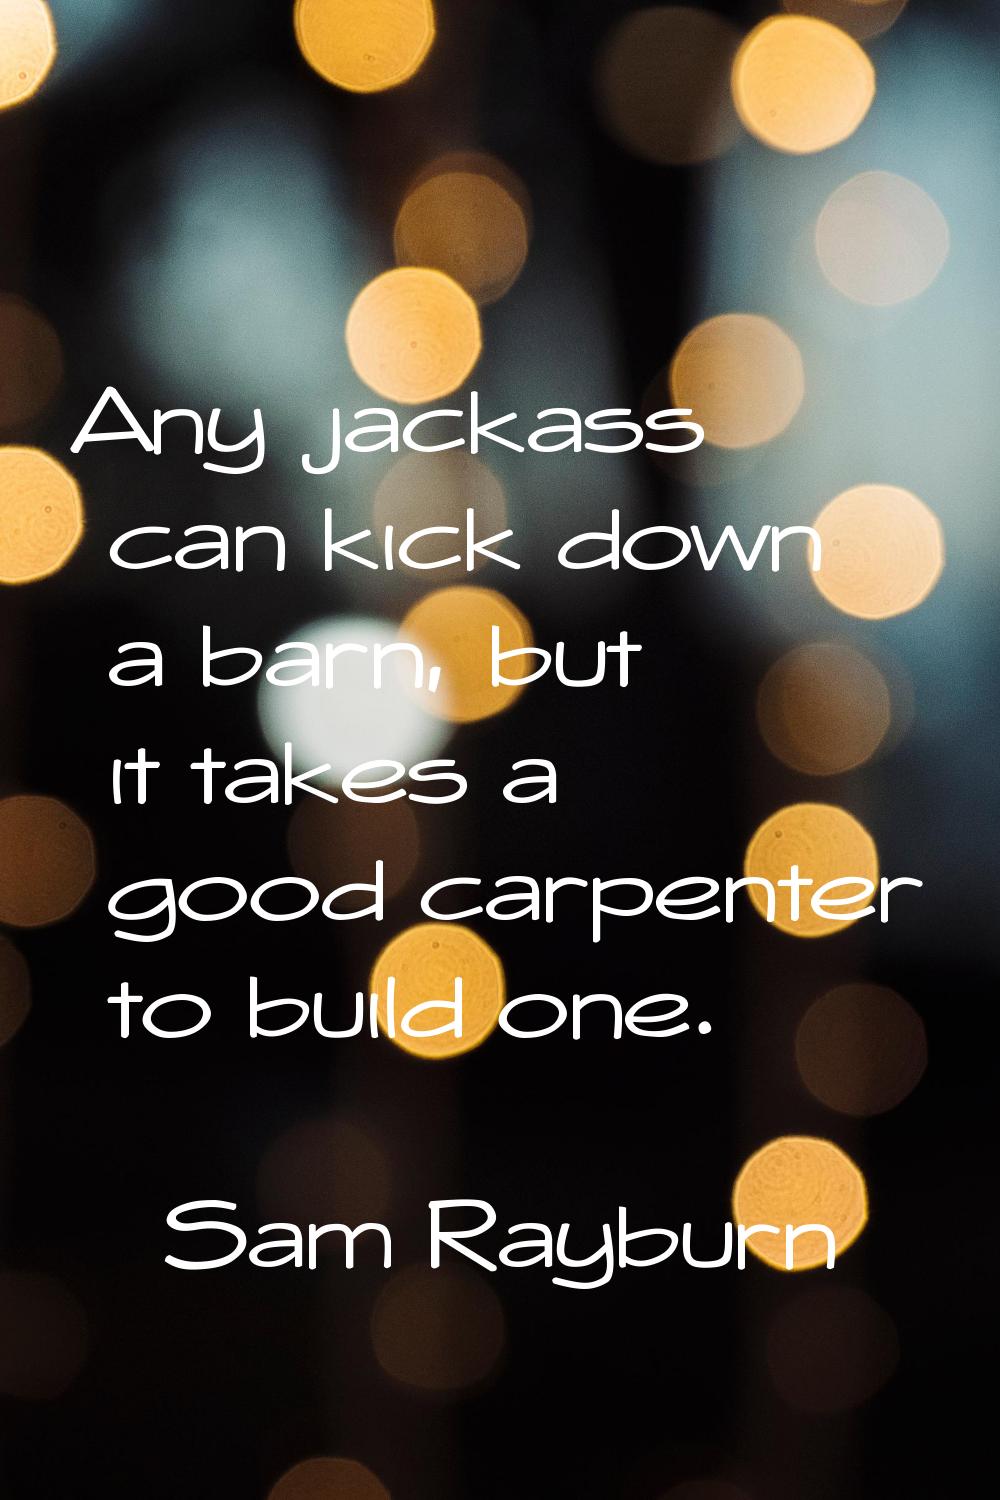 Any jackass can kick down a barn, but it takes a good carpenter to build one.